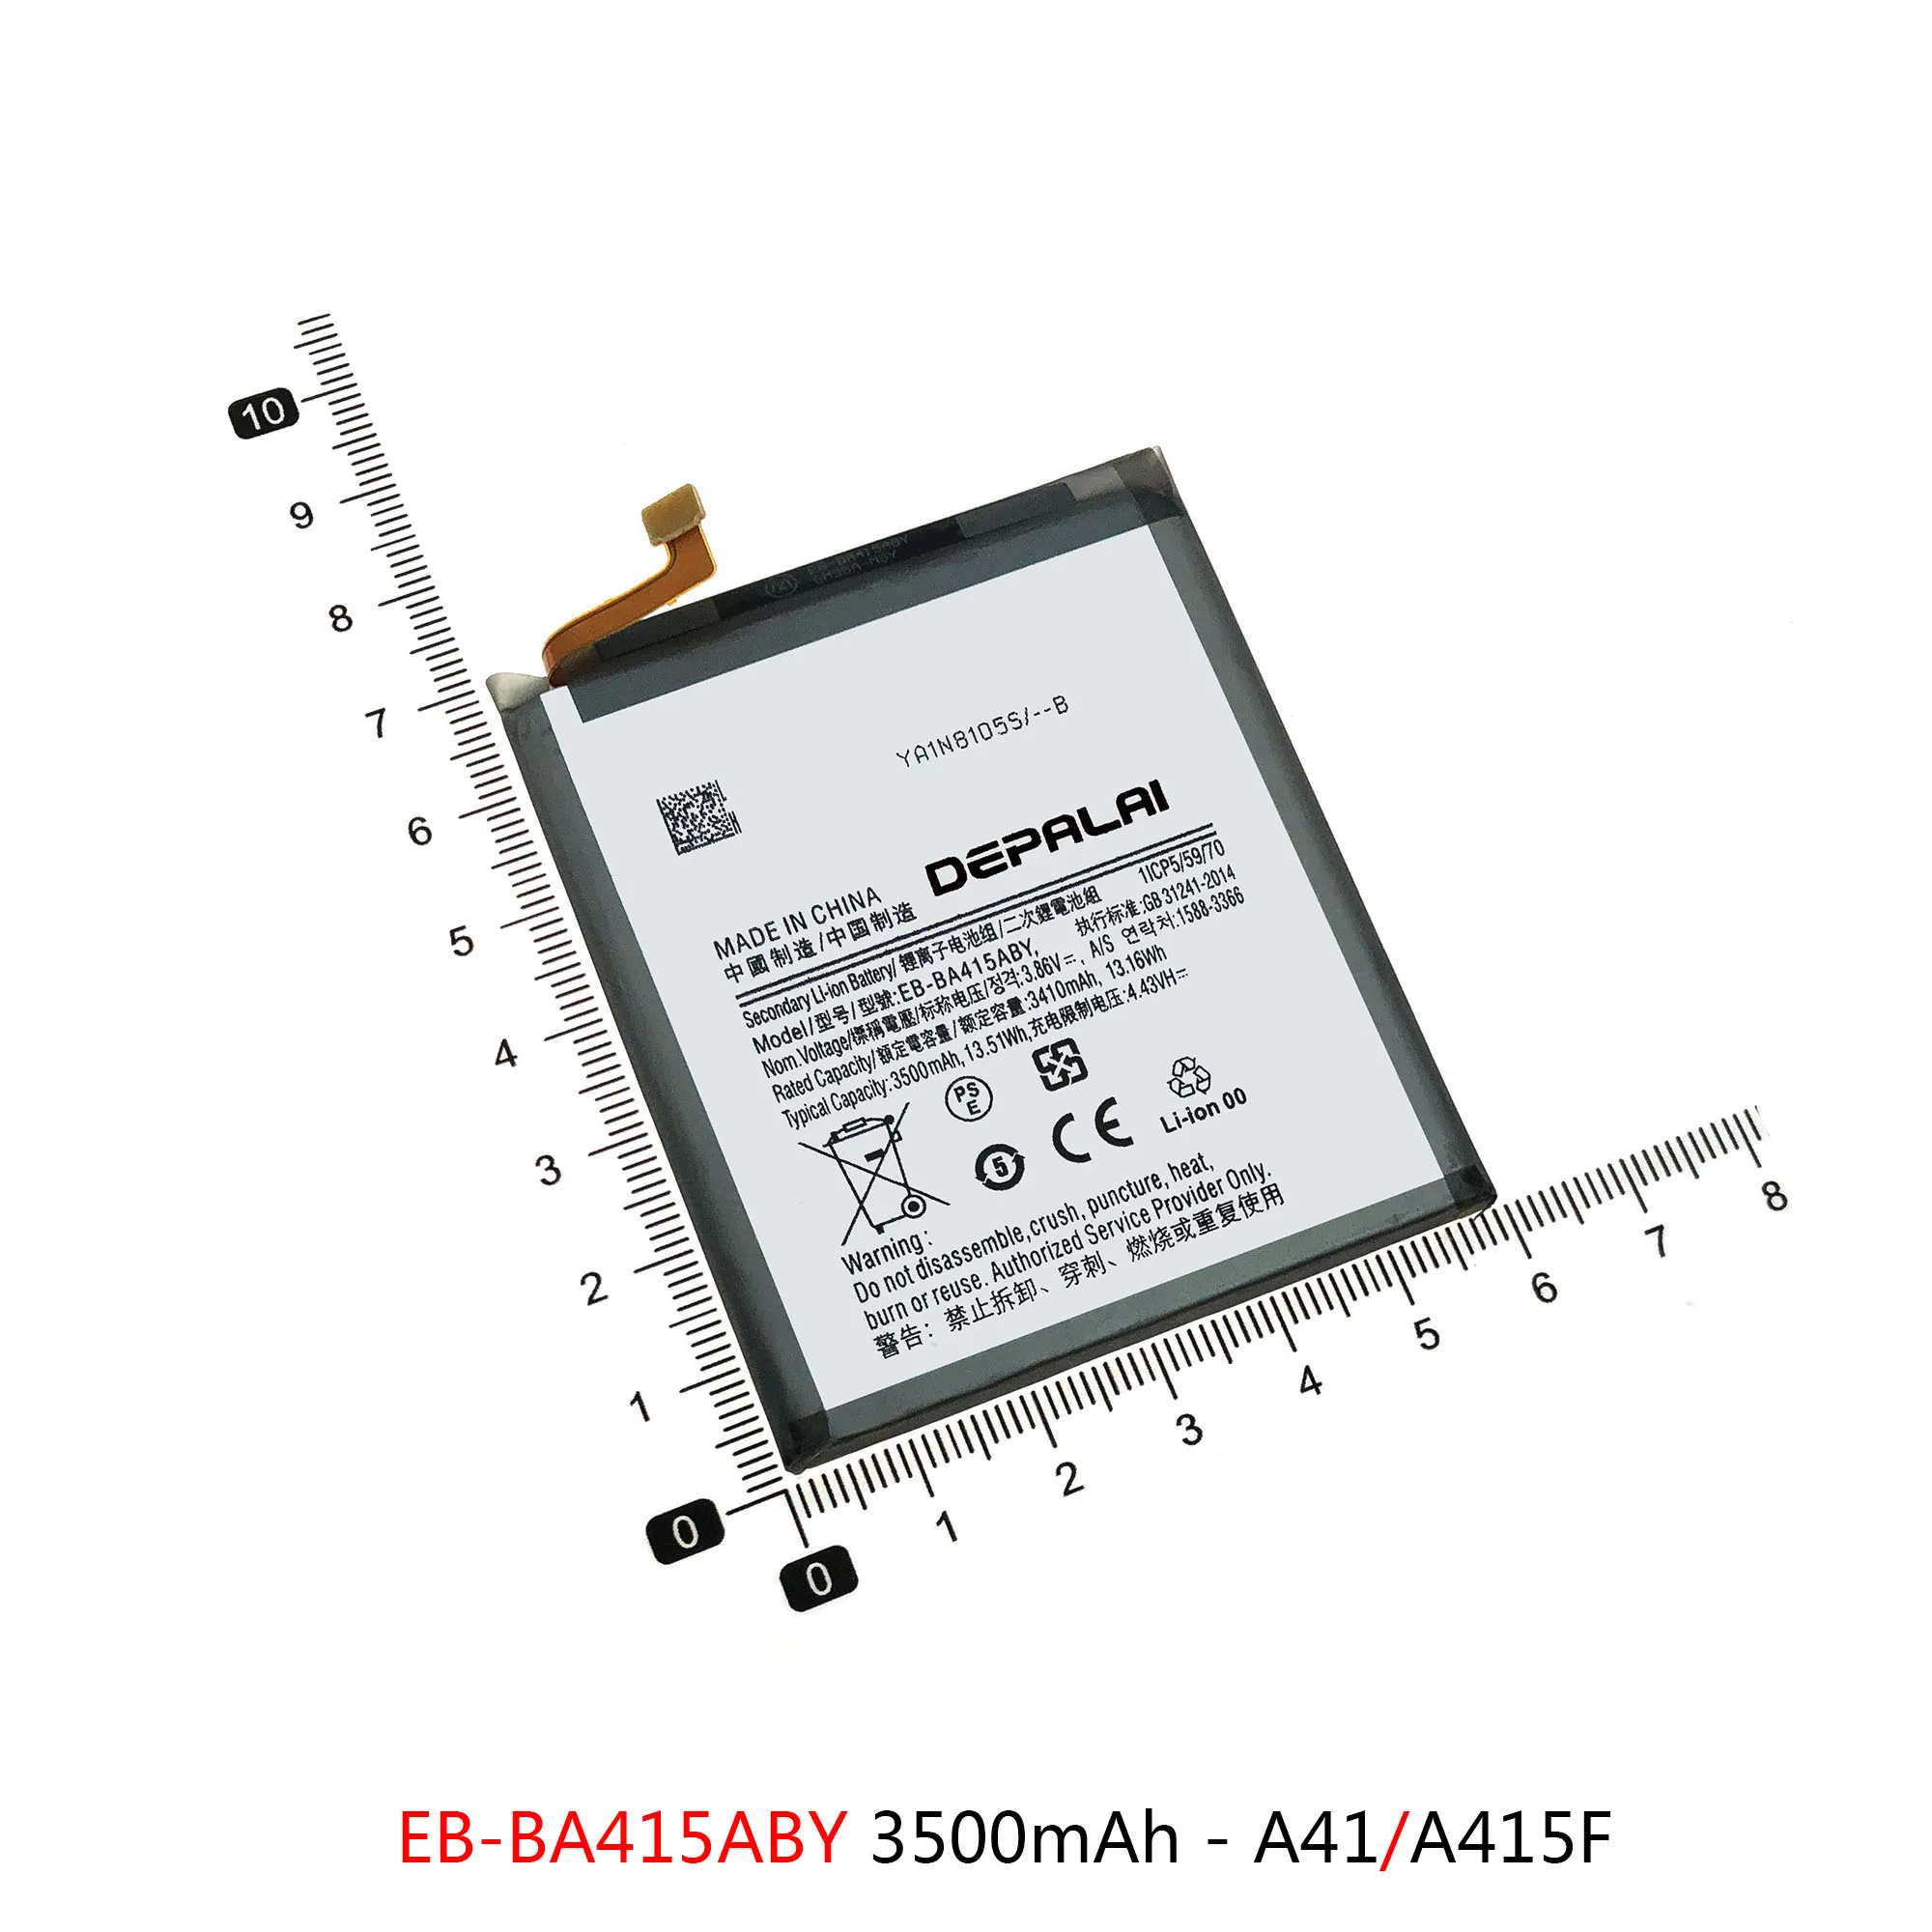 

EB-BA405ABE Battery For Samsung Galaxy A40 2019 A405F A41 A415F Batteries EB-BA415ABY EB-BA405ABU Replacement Repair Parts